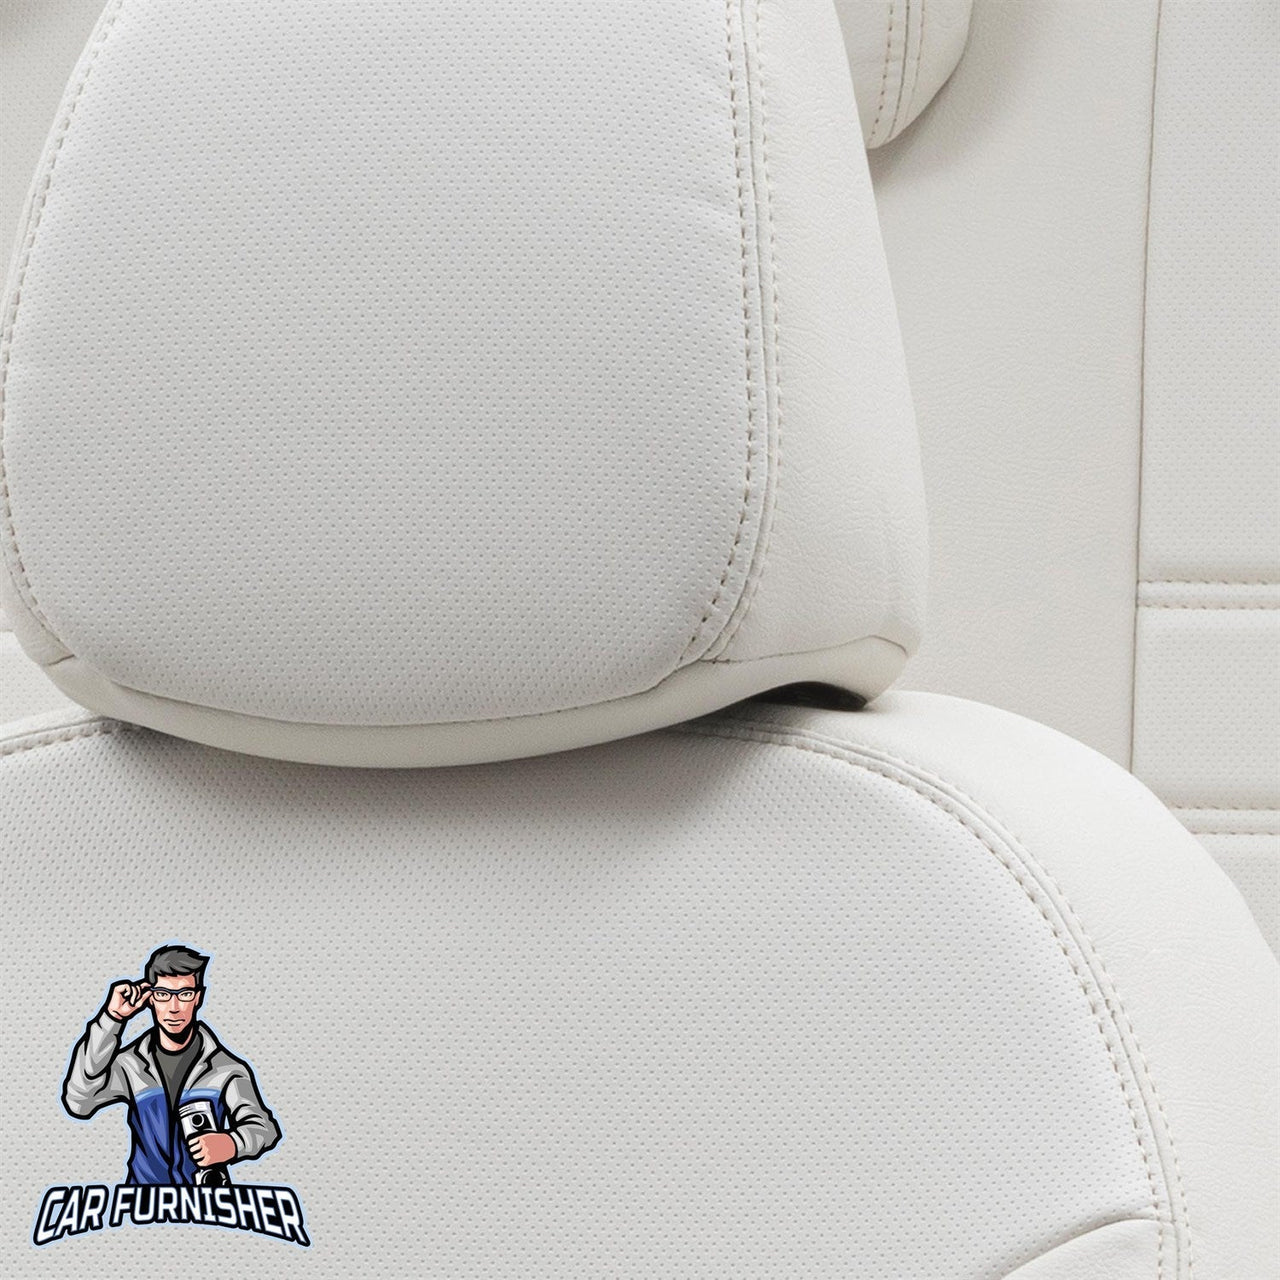 Volvo V70 Seat Cover Istanbul Leather Design Ivory Leather